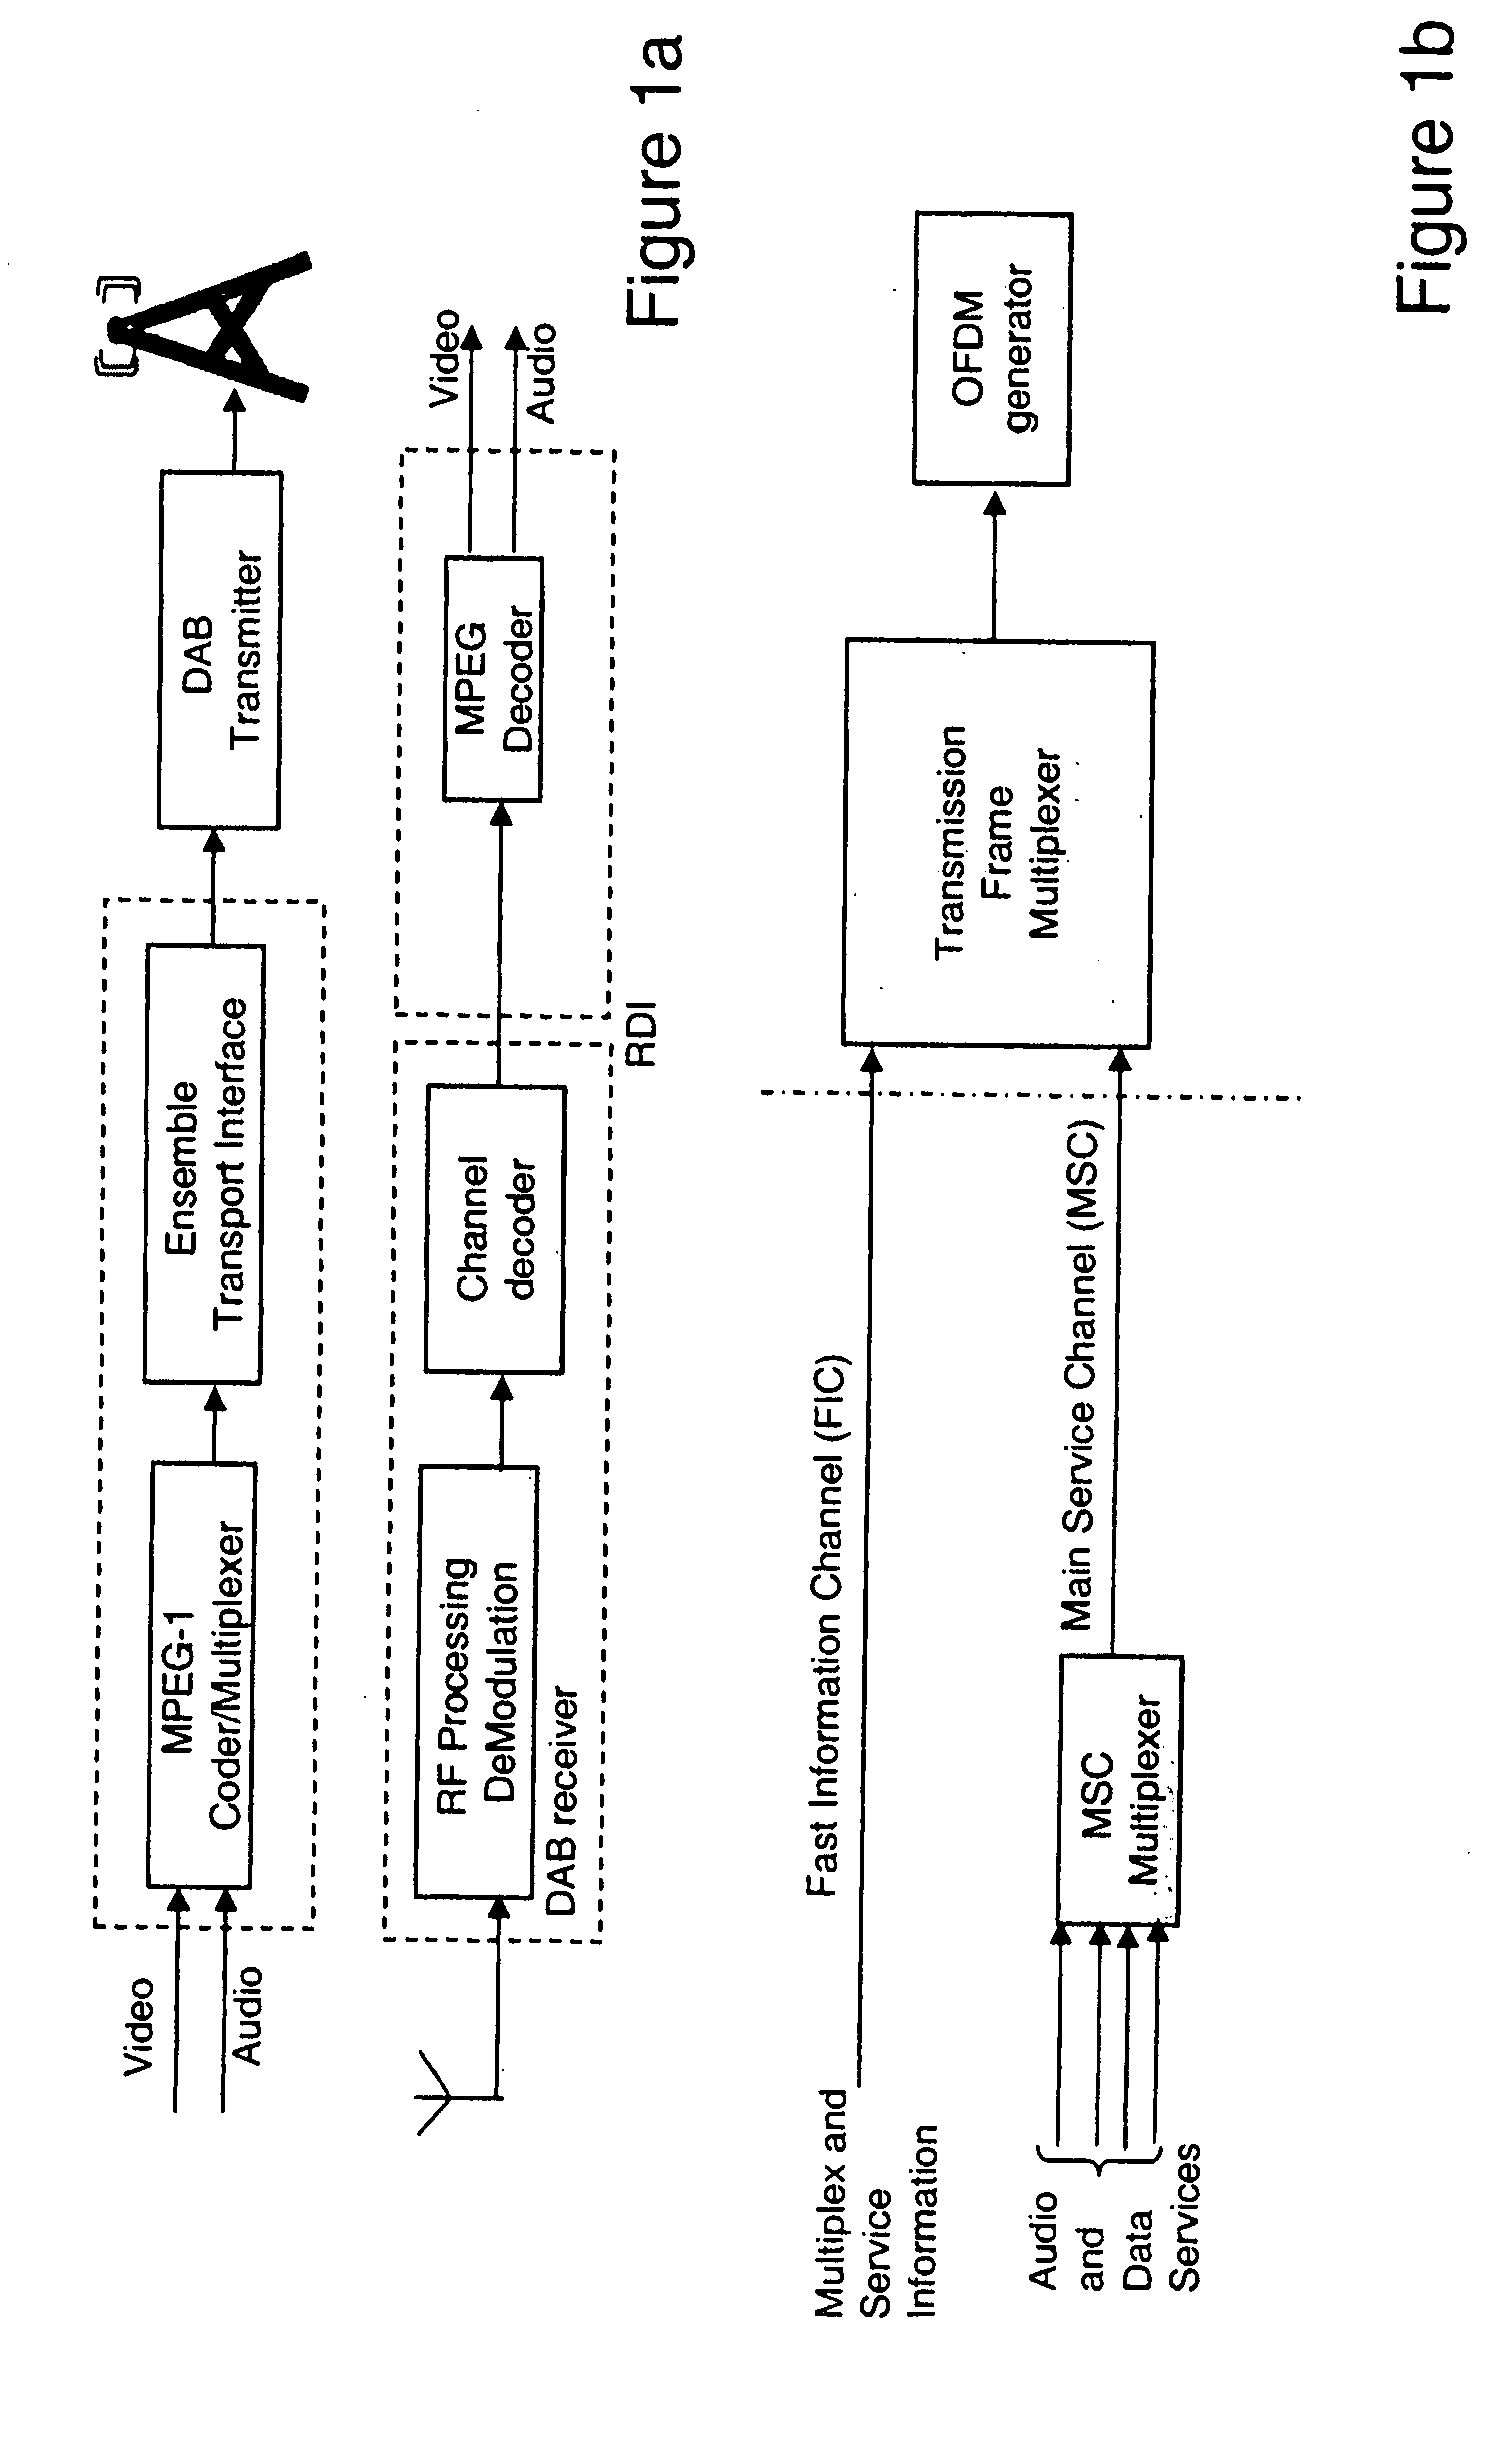 Electronic programme guide for a mobile communications device